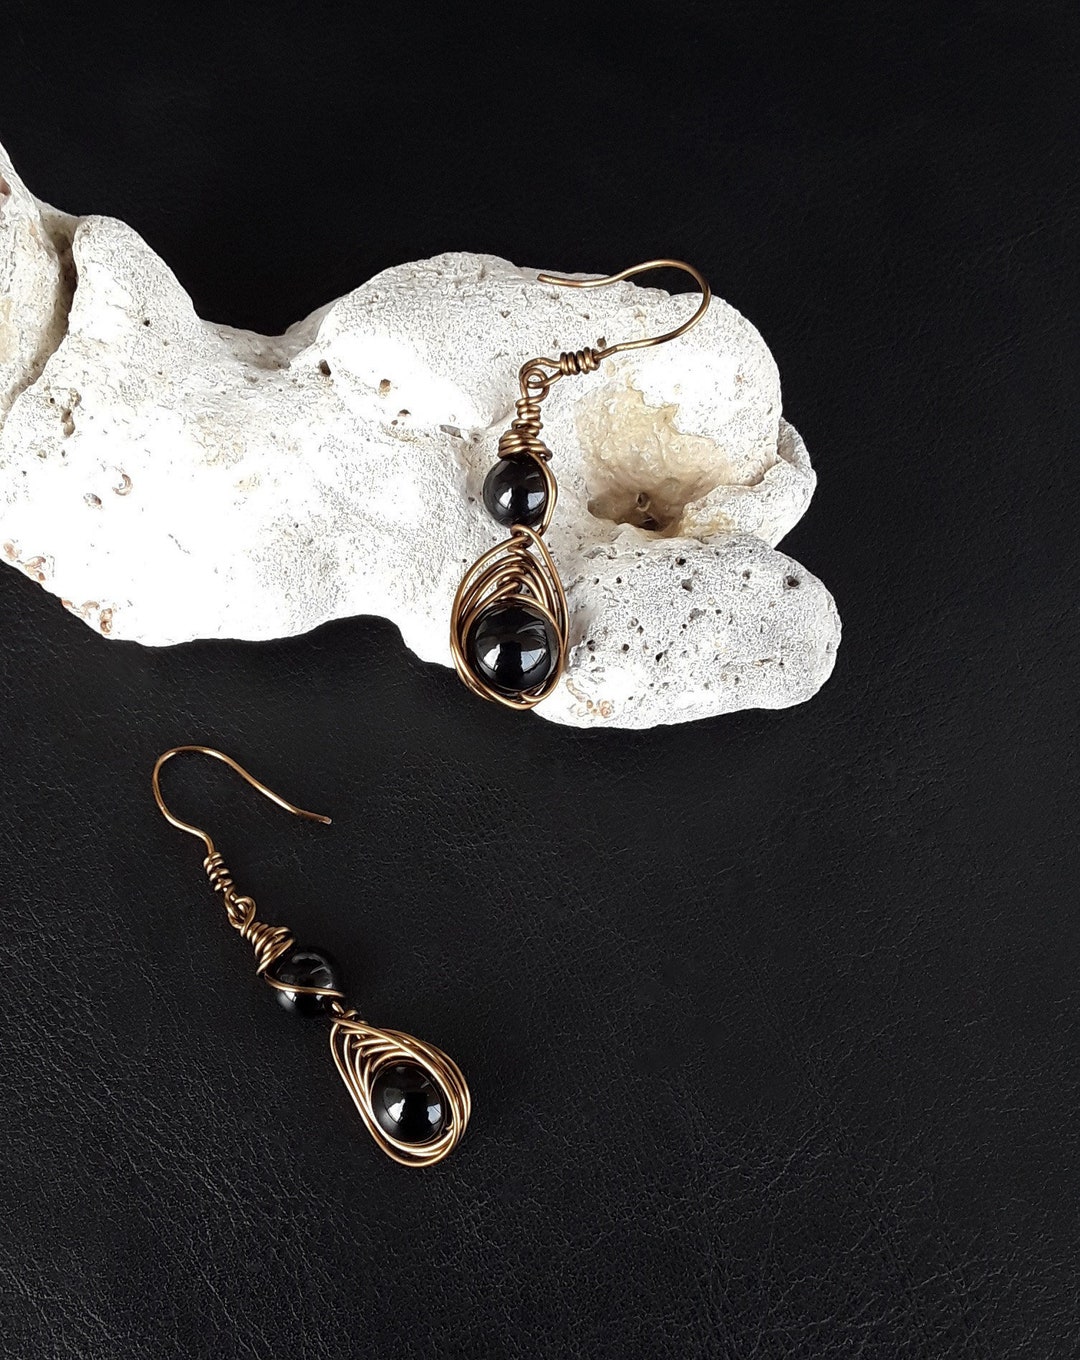 The Black Onyx Healing Stone Earrings Exclusively Made of AAA - Etsy